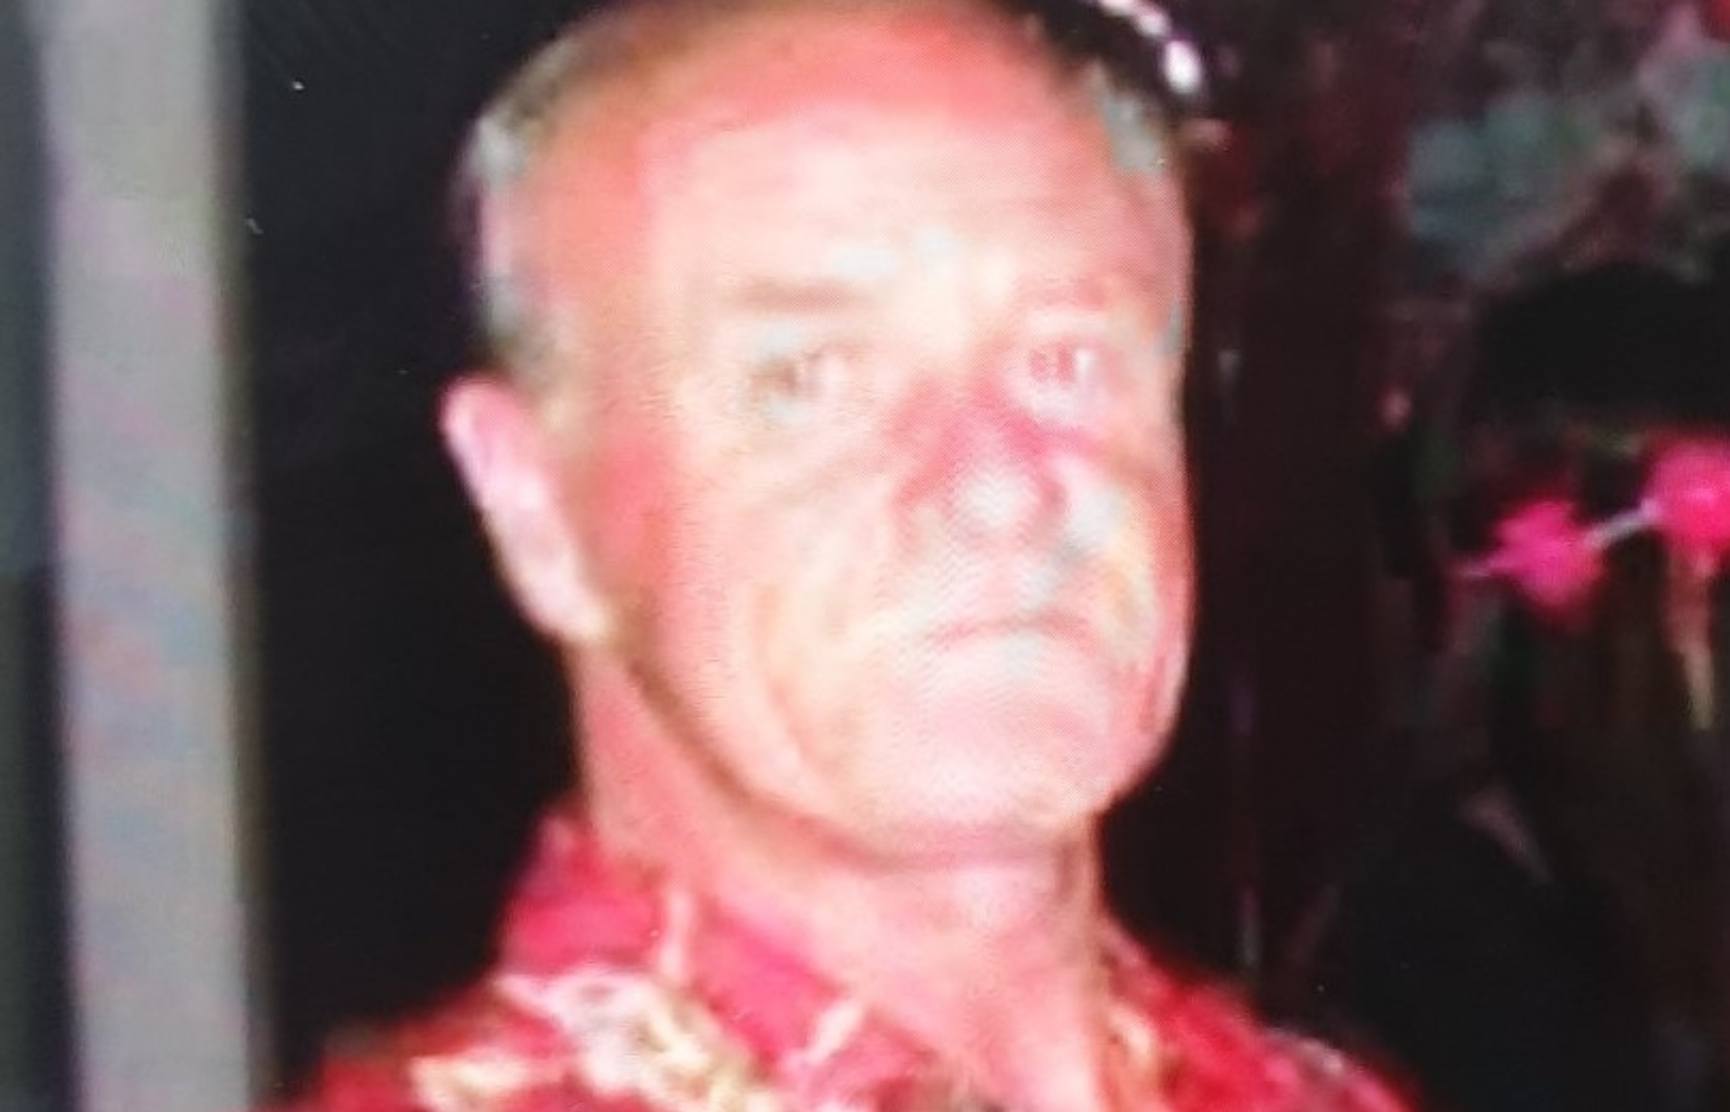 Mr Downie is described as white, around 5ft 6in, medium-build with balding and short grey hair.